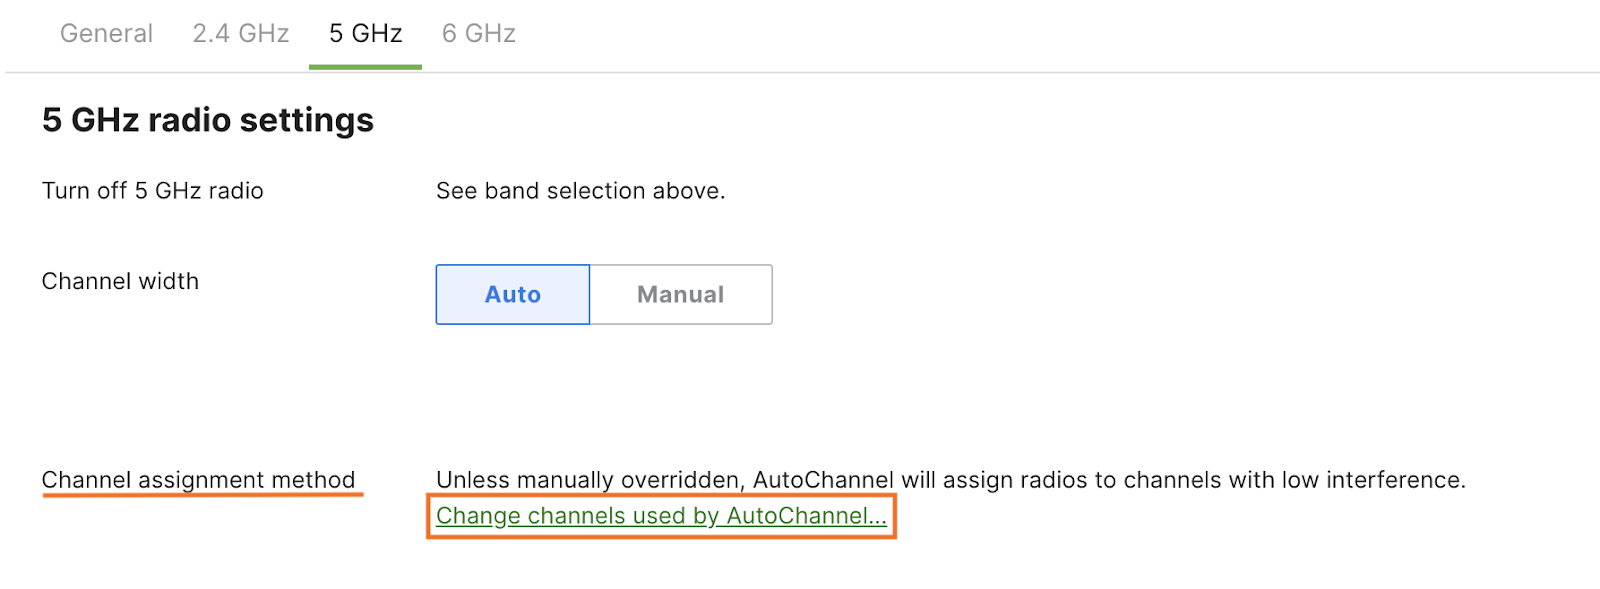 Dashboard UI 5GHz radio settings navigaition to channel assingment method -  how to change it to AutoChannel